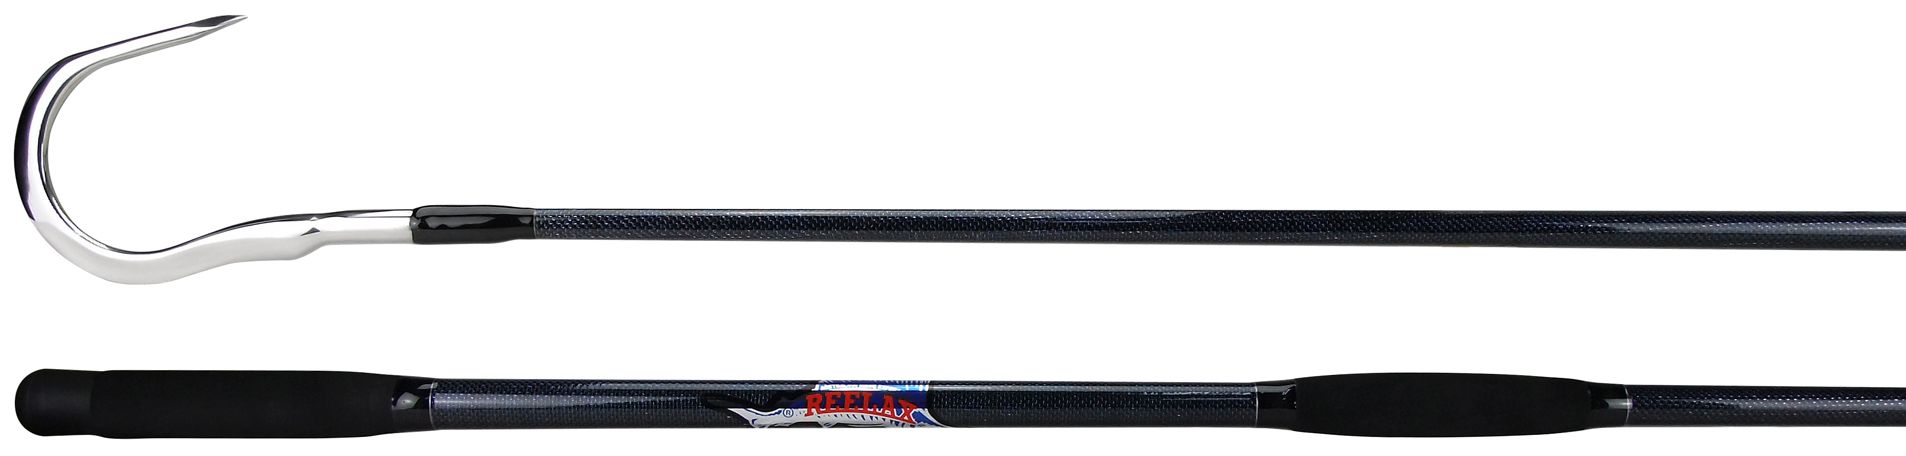 Reelax Fishing Gaff - 4ft (1.2m) with 4 Inch Head - Grander Blue Series 3K  Carbon Gaff (RX99110)